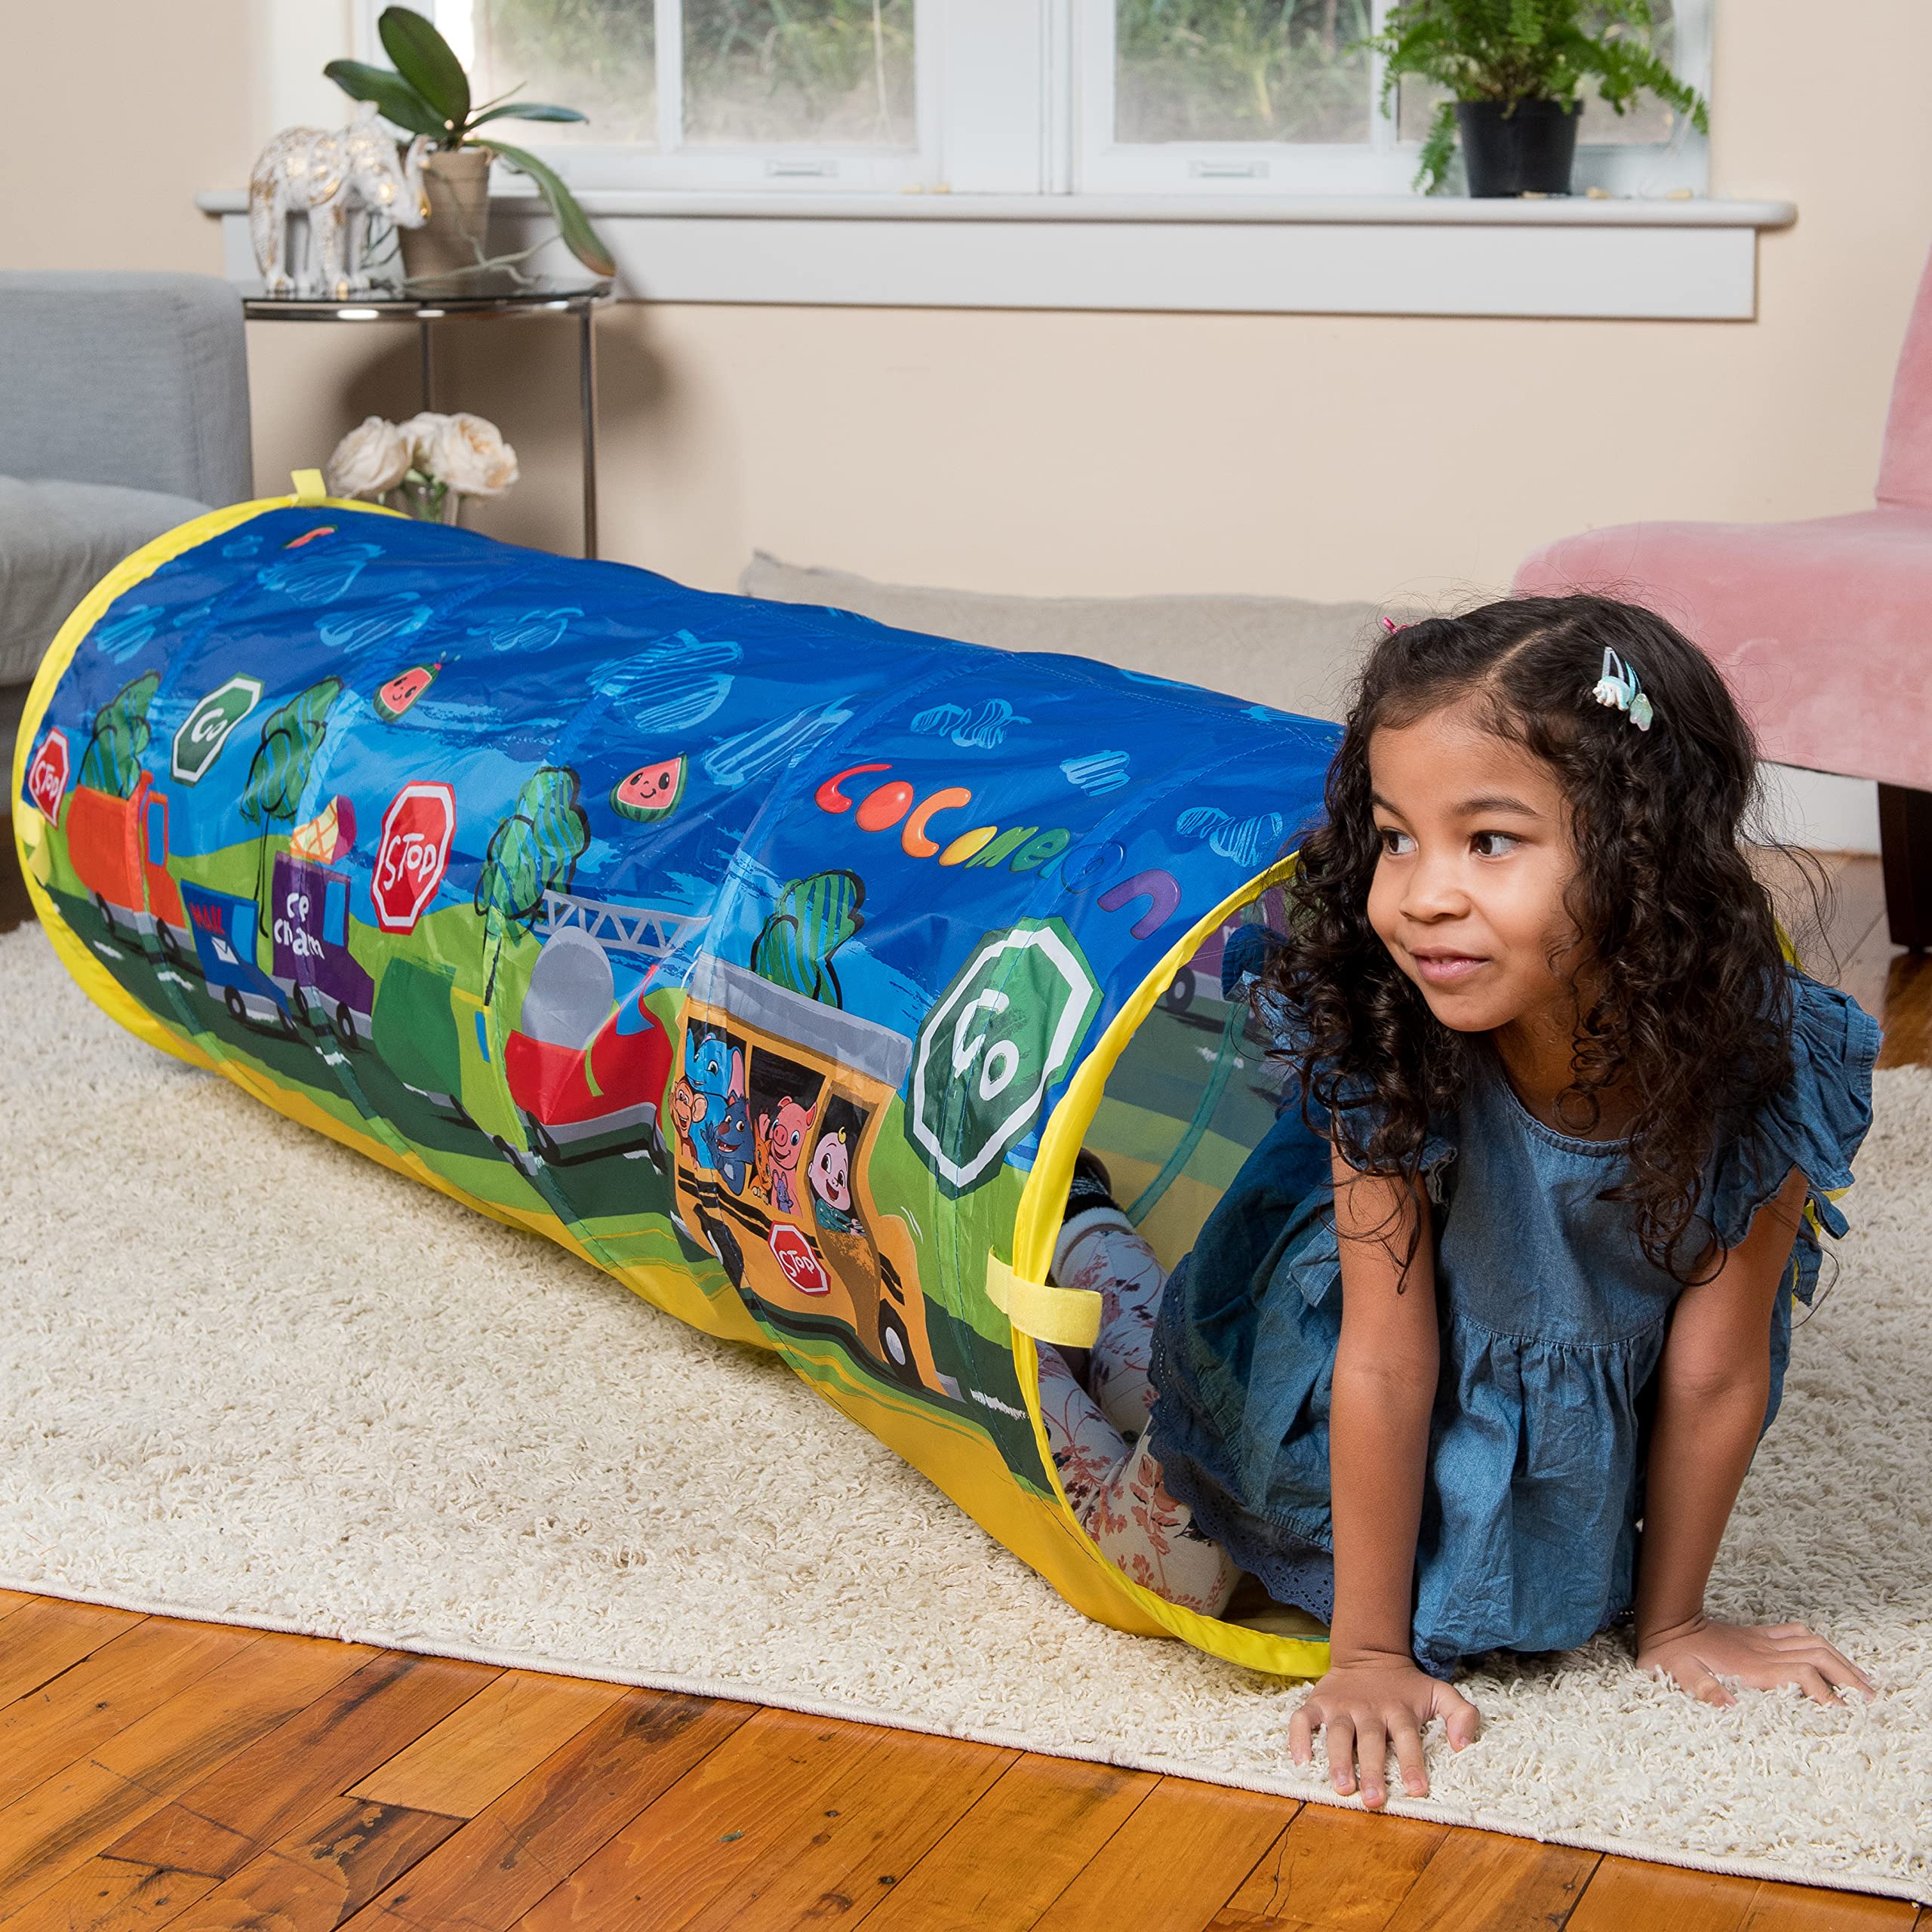 CoComelon Tunnel for Toddlers – Pop Up Play Tunnel Tent for Kids to Crawl Through | Collapsible and Portable Toy – Sunny Days Entertainment